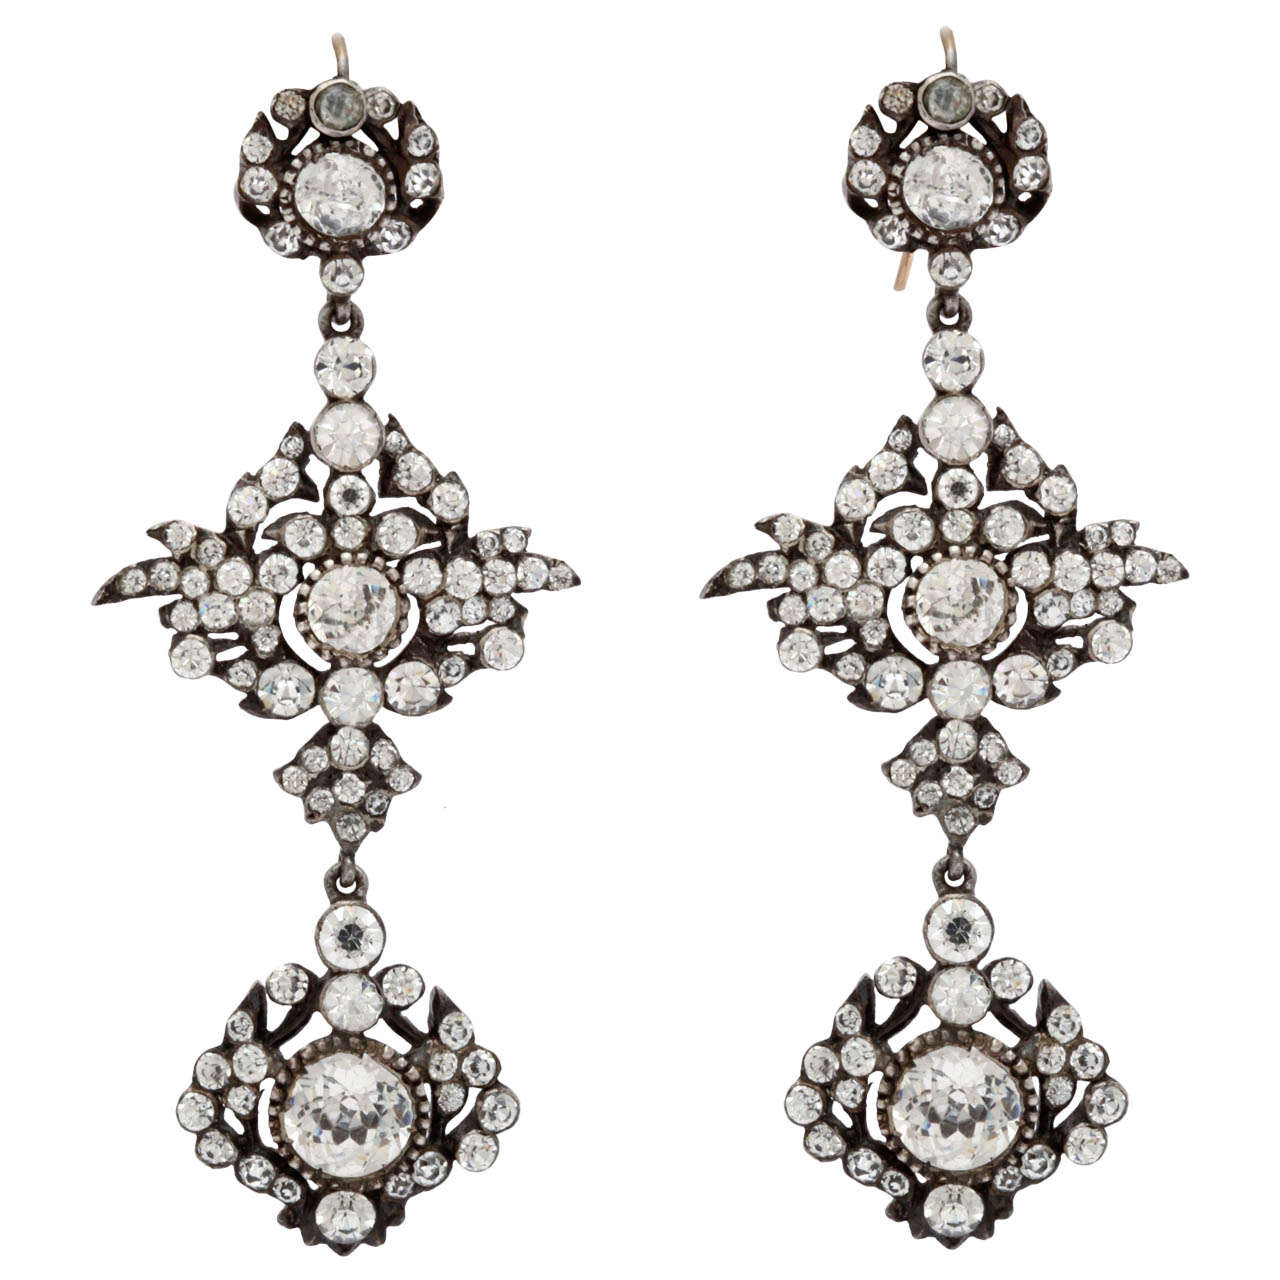 Magnificent Chandelier Earrings of Shining Paste For Sale at 1stdibs